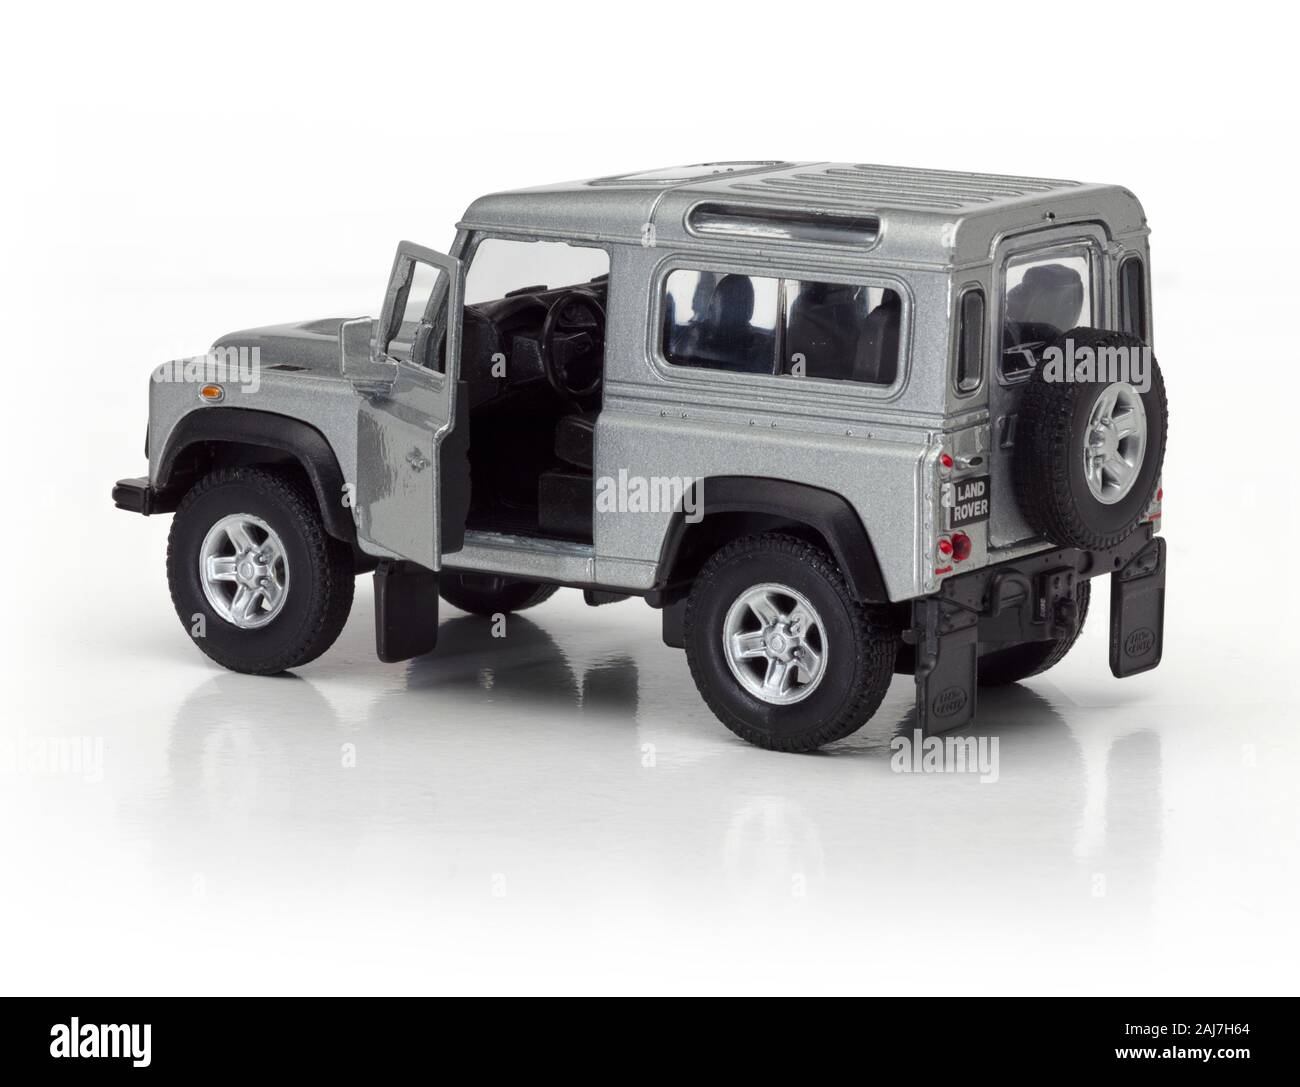 Toy Land Rover Defender on a white background Stock Photo